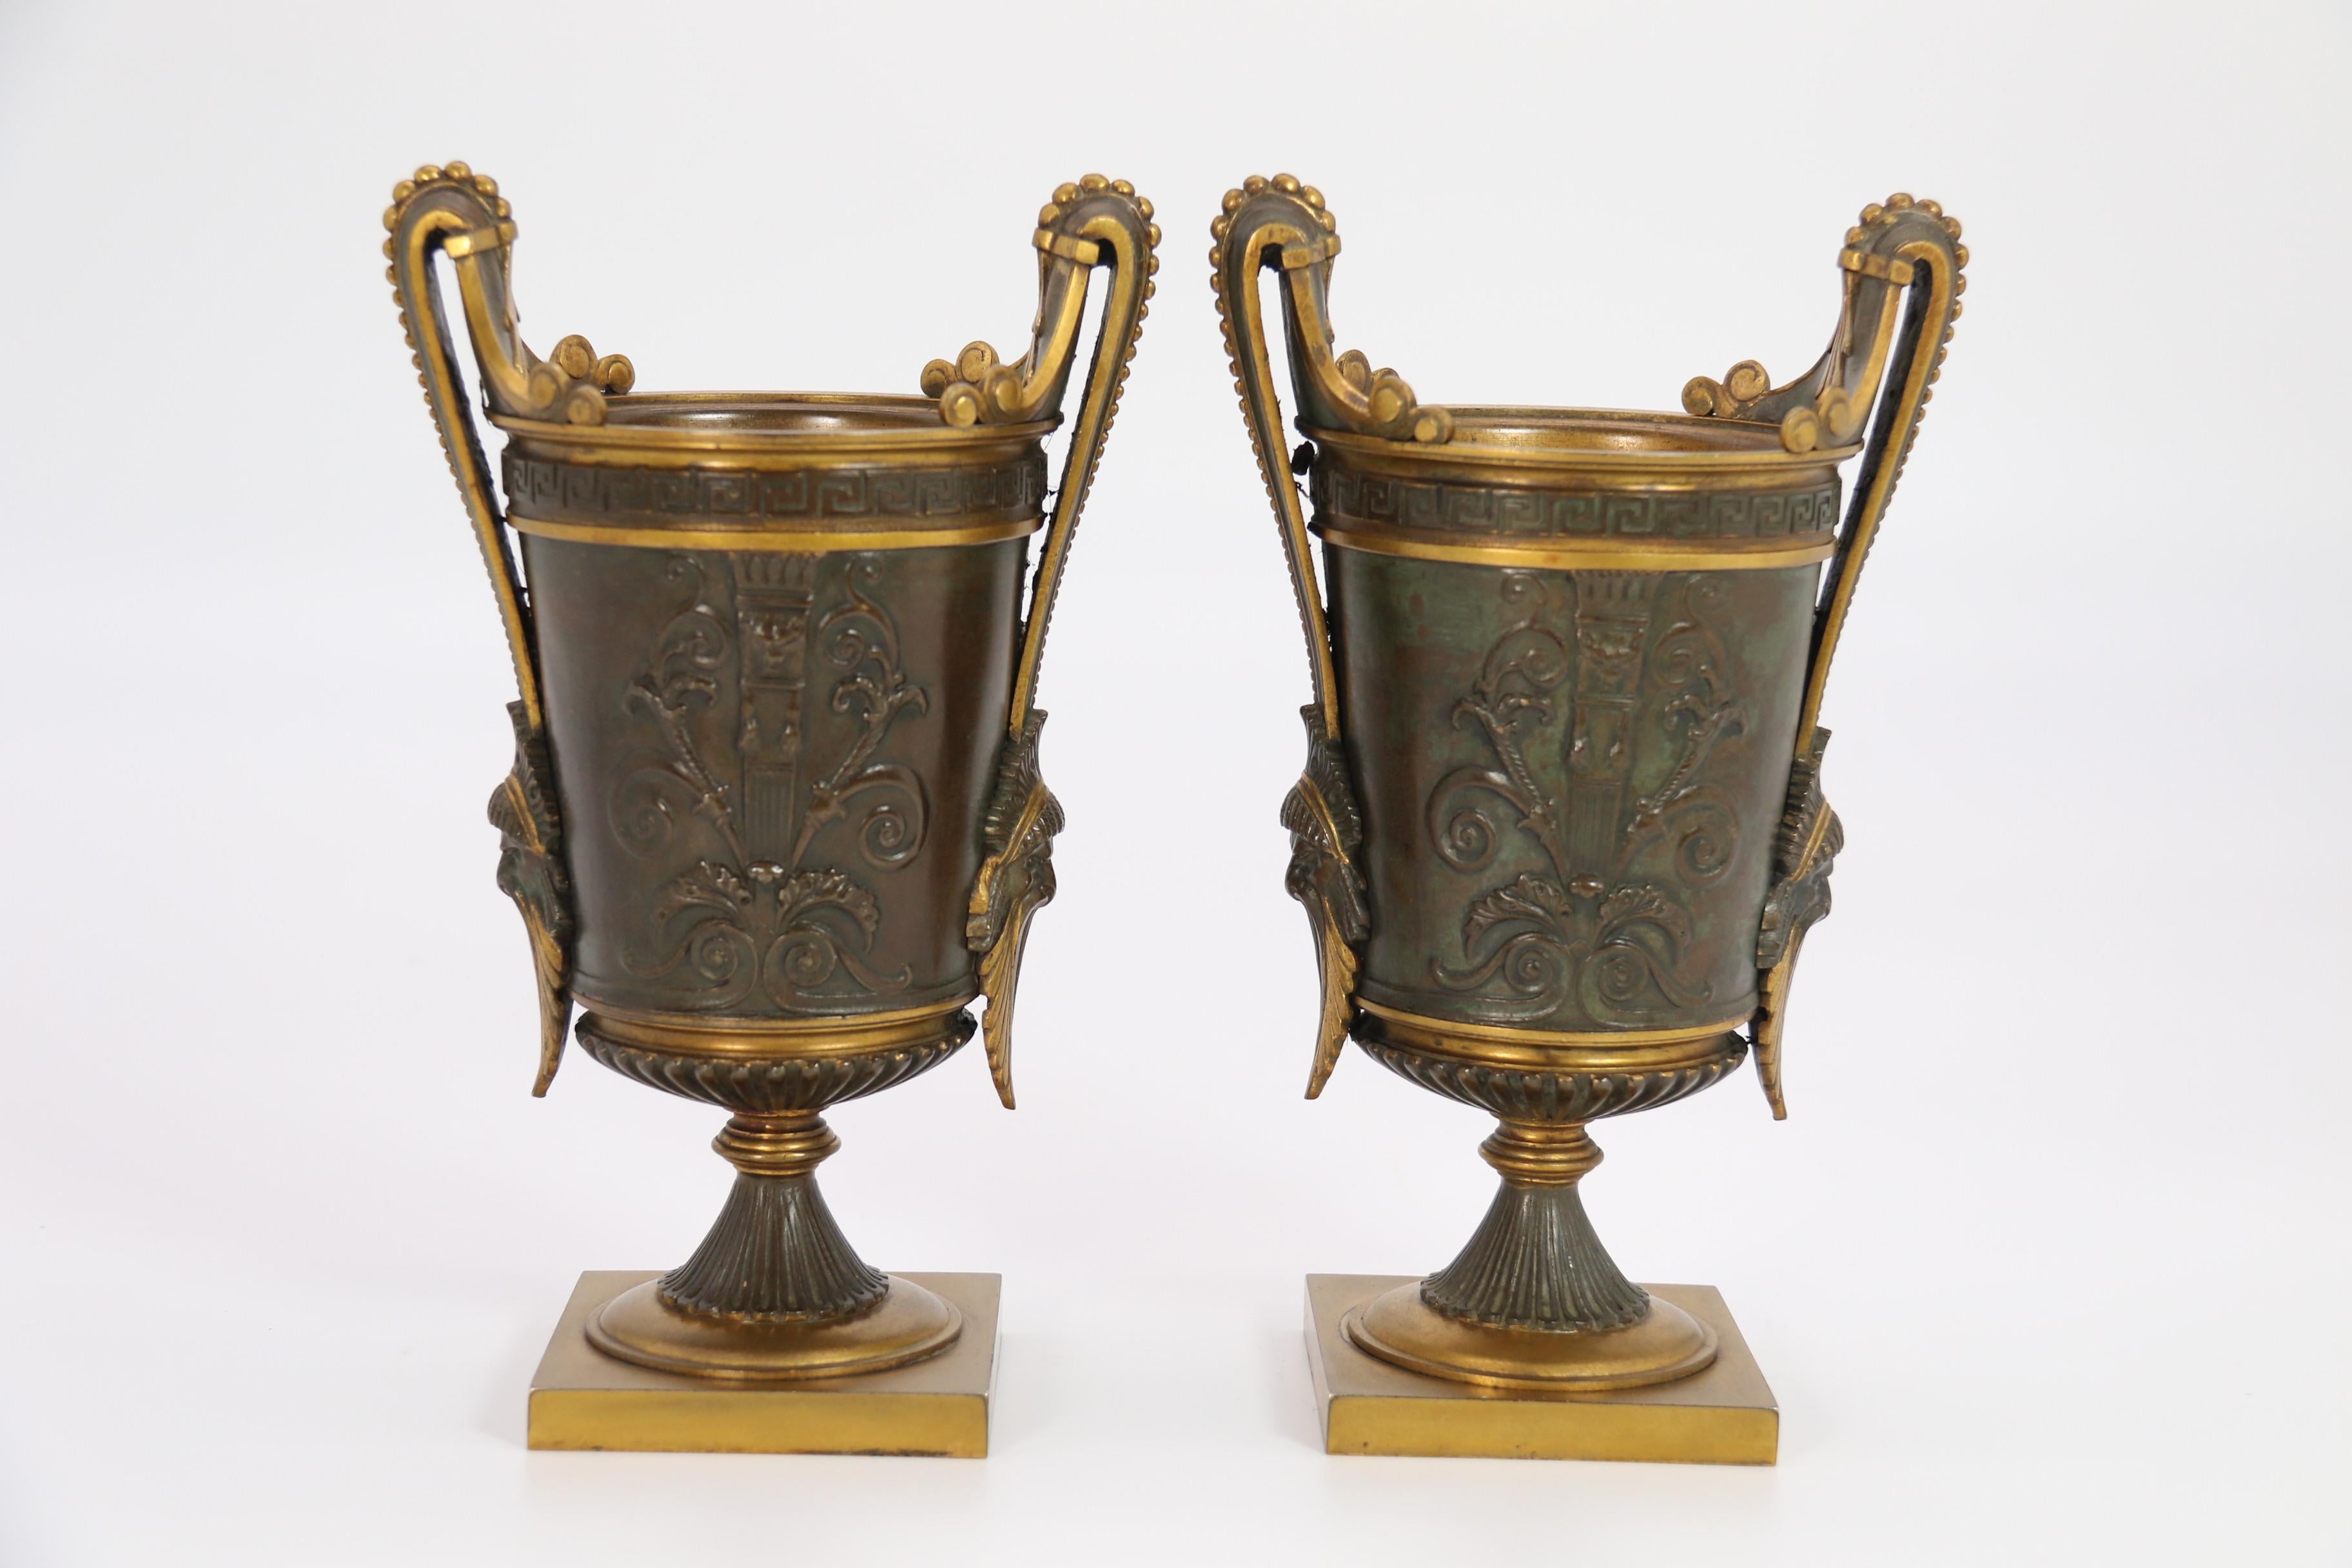 Bronze Empire period bronze and ormolu Grecian style pair of classical urns, circa 1830 For Sale